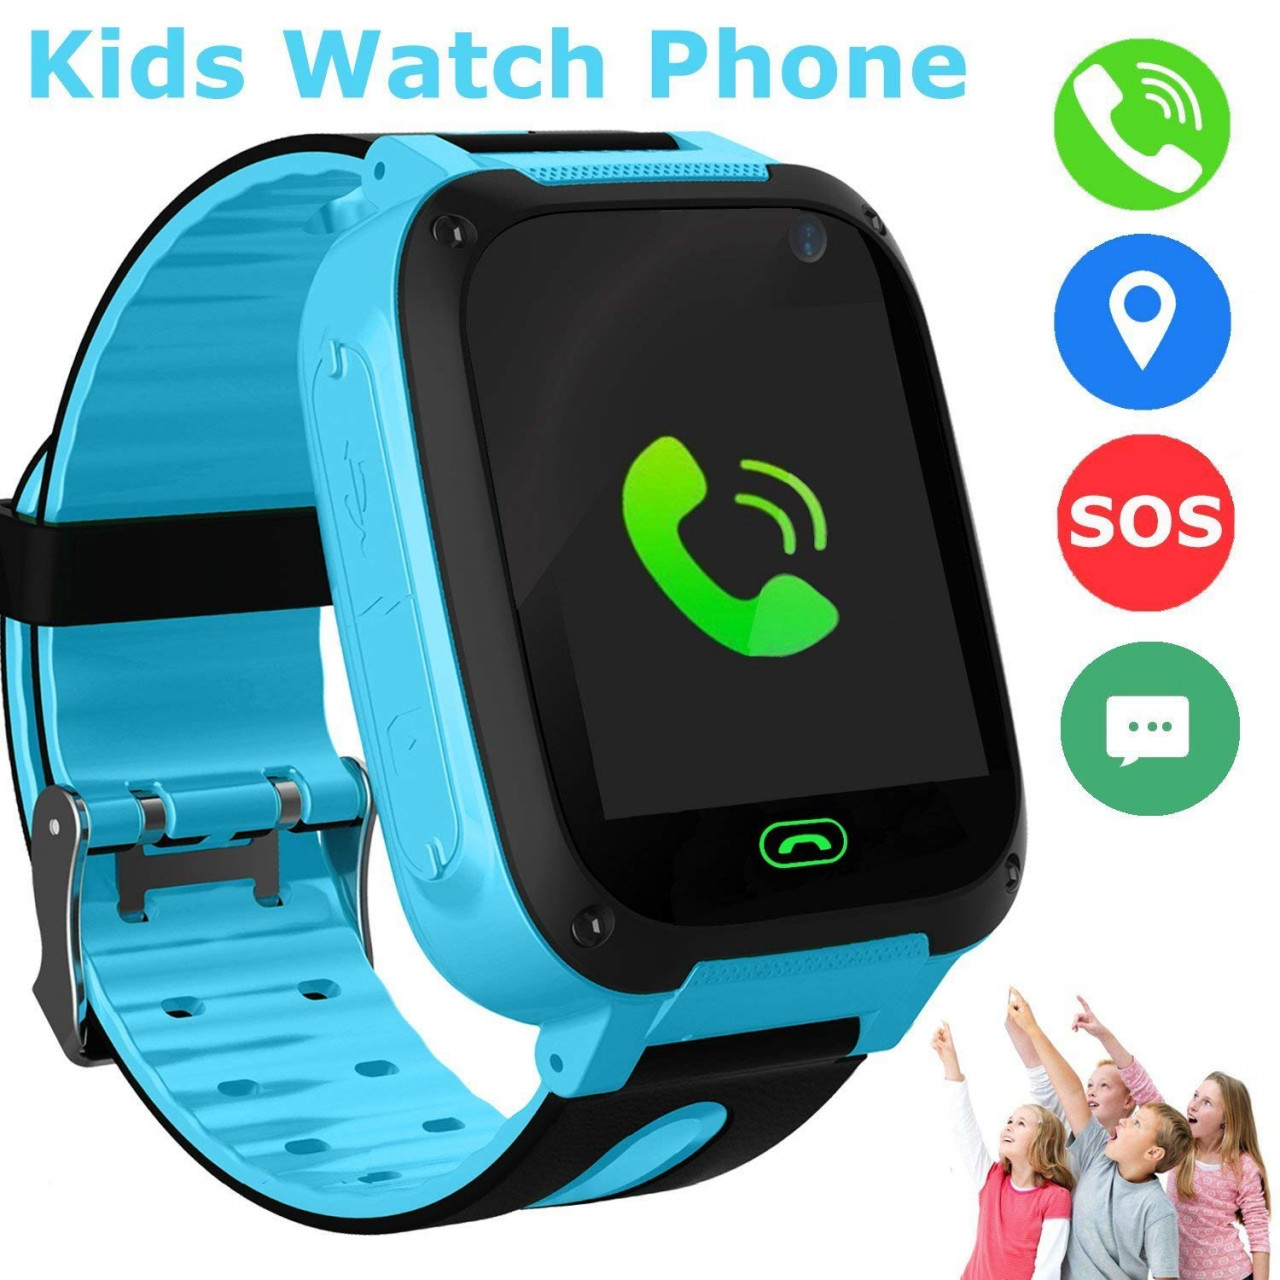 Kids Smart Watch Phone smartwatches for 